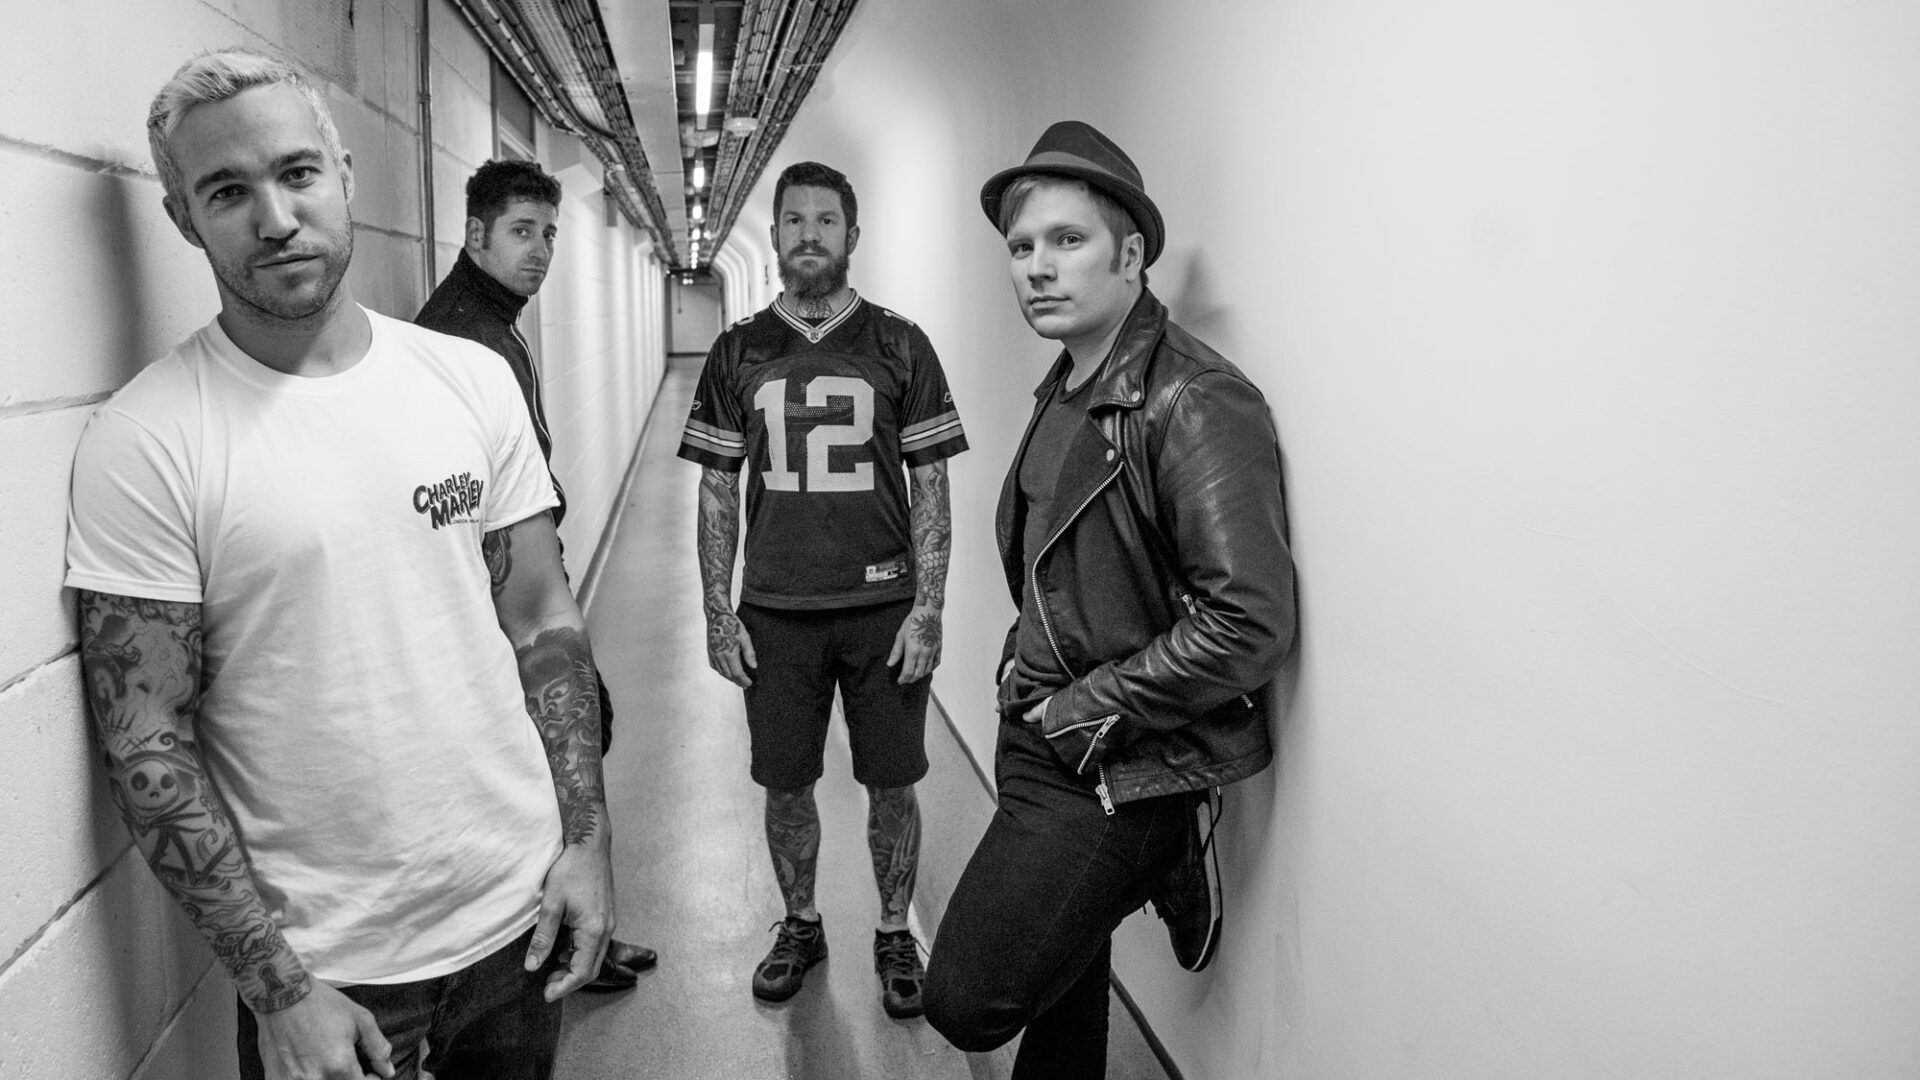 OP-ED: Fall Out Boy do not need you or me to defend them